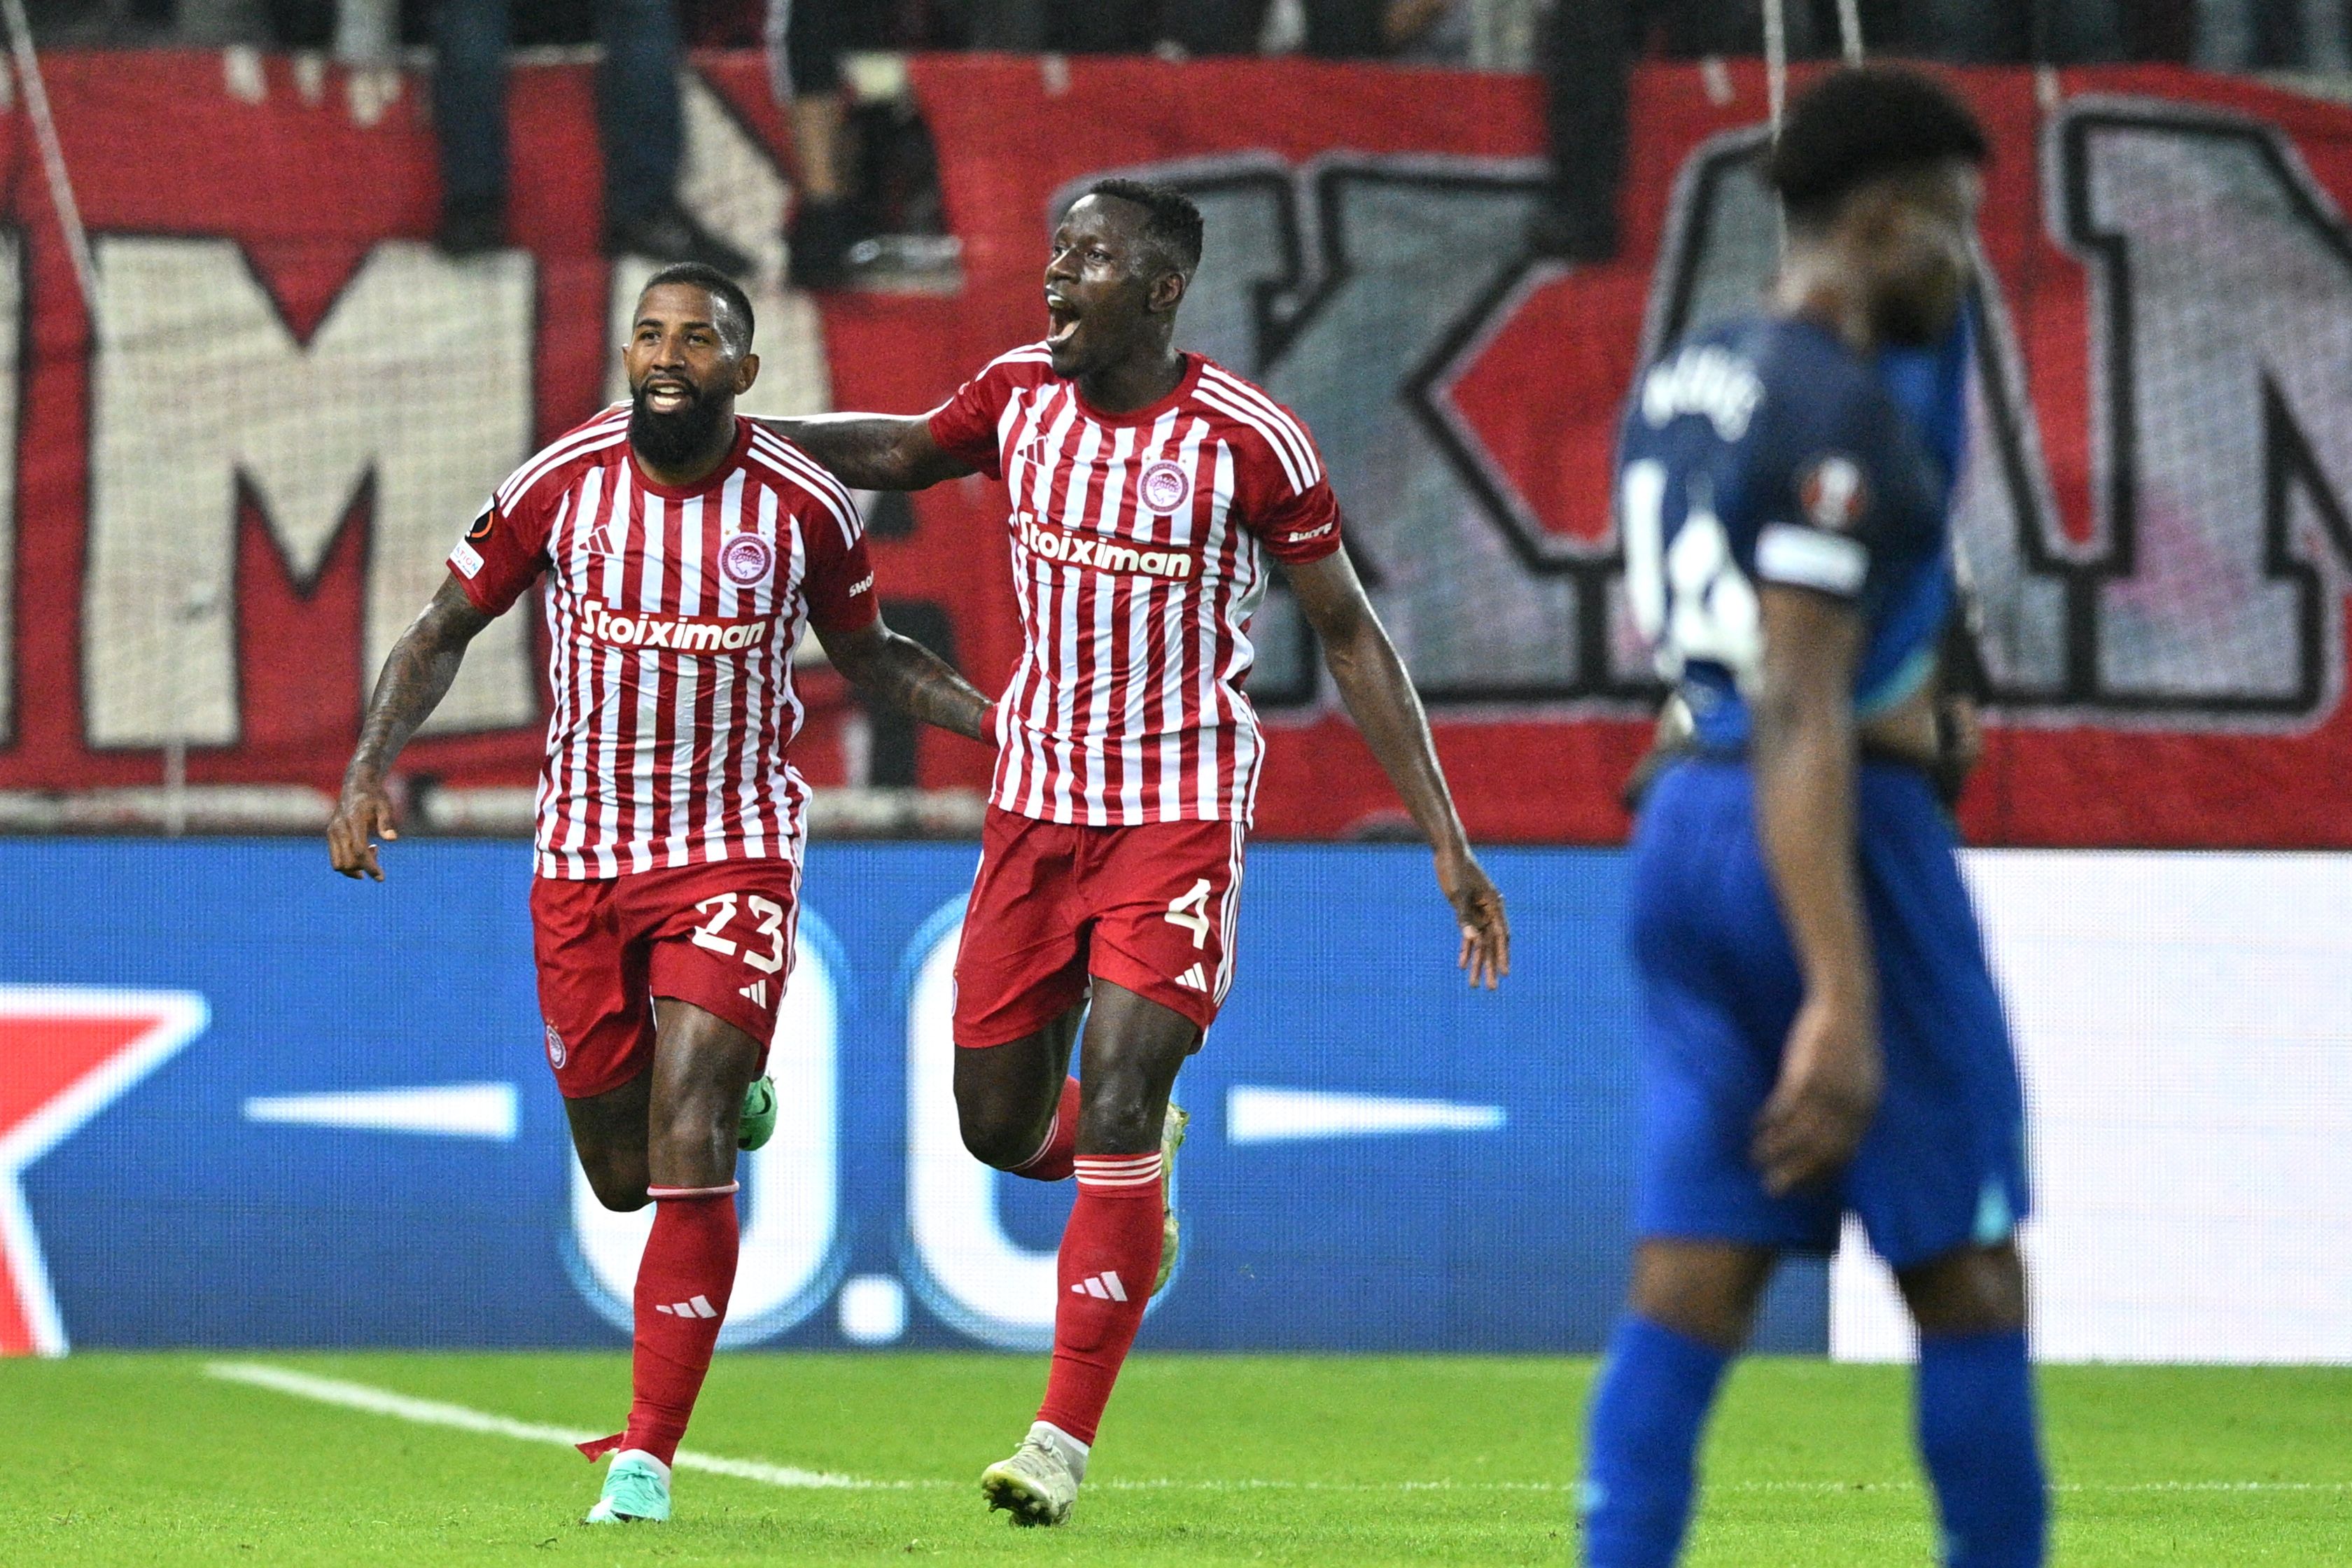 West Ham suffer first European loss in 18 matches at hands of Olympiacos |  The Independent